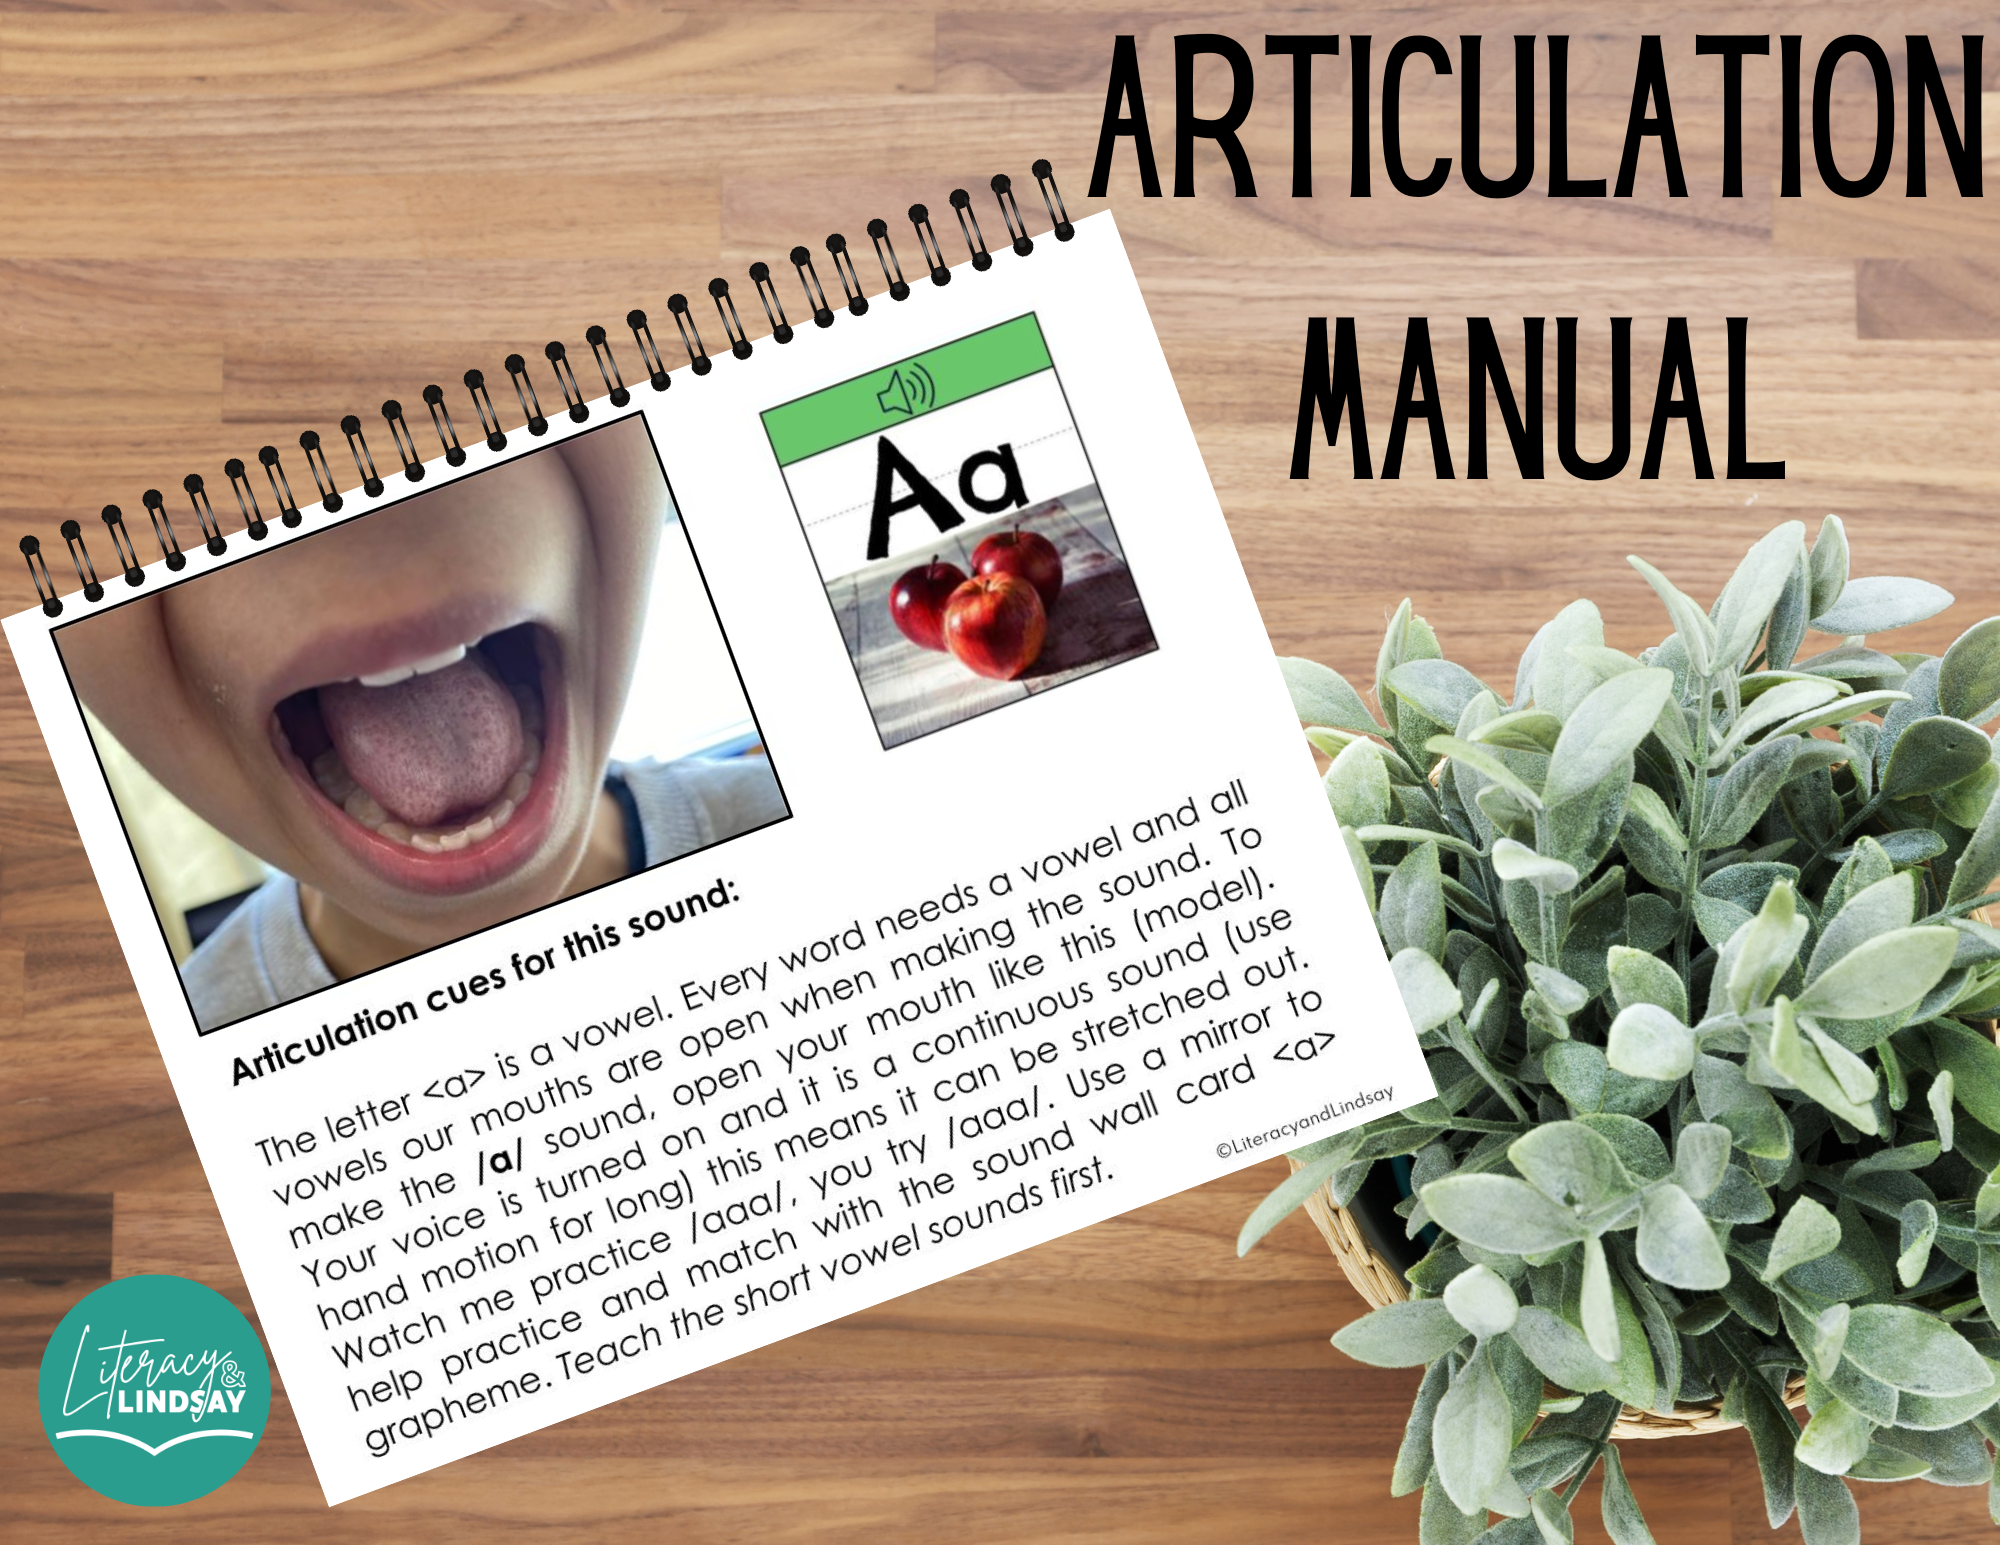 Articulation Manual (Scripts and Gestures)